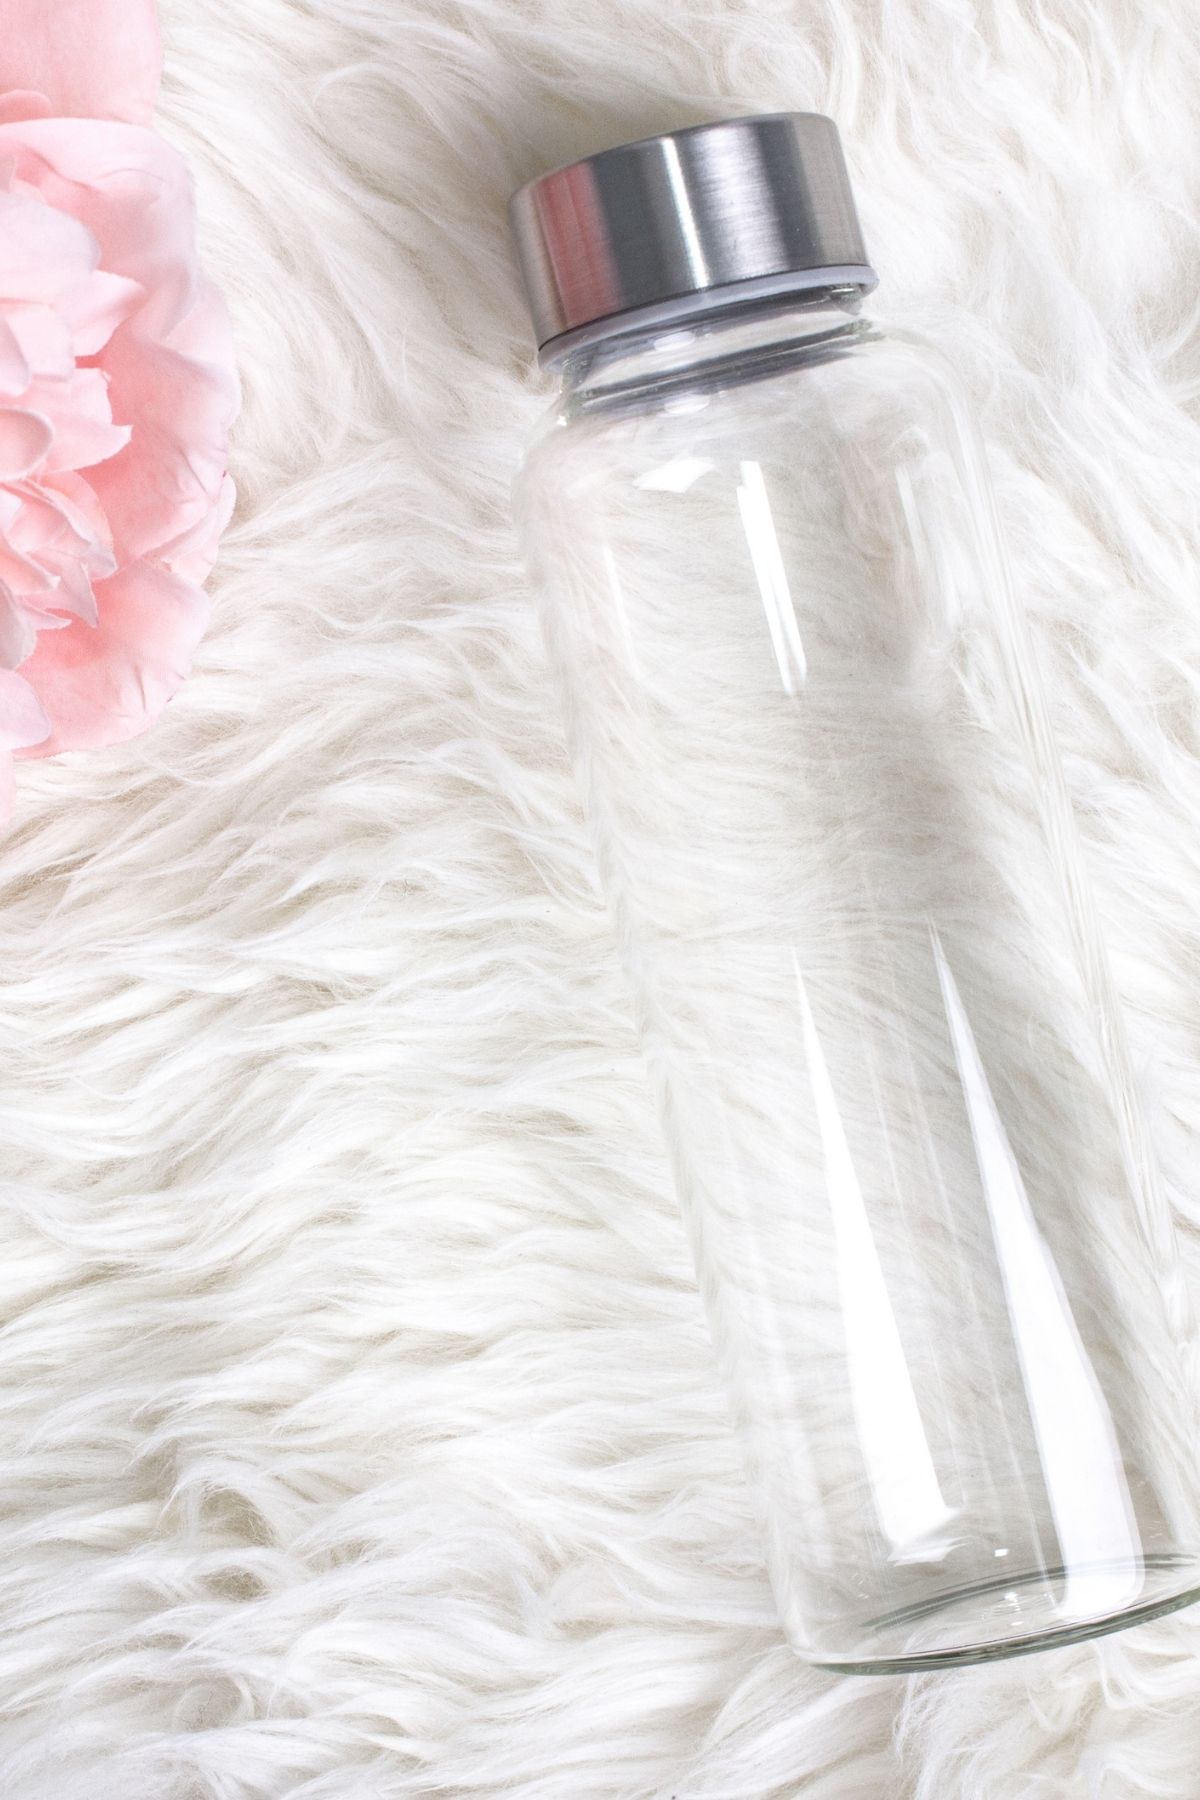 Clear water bottle on white fur rug with pink flower in top left corner.